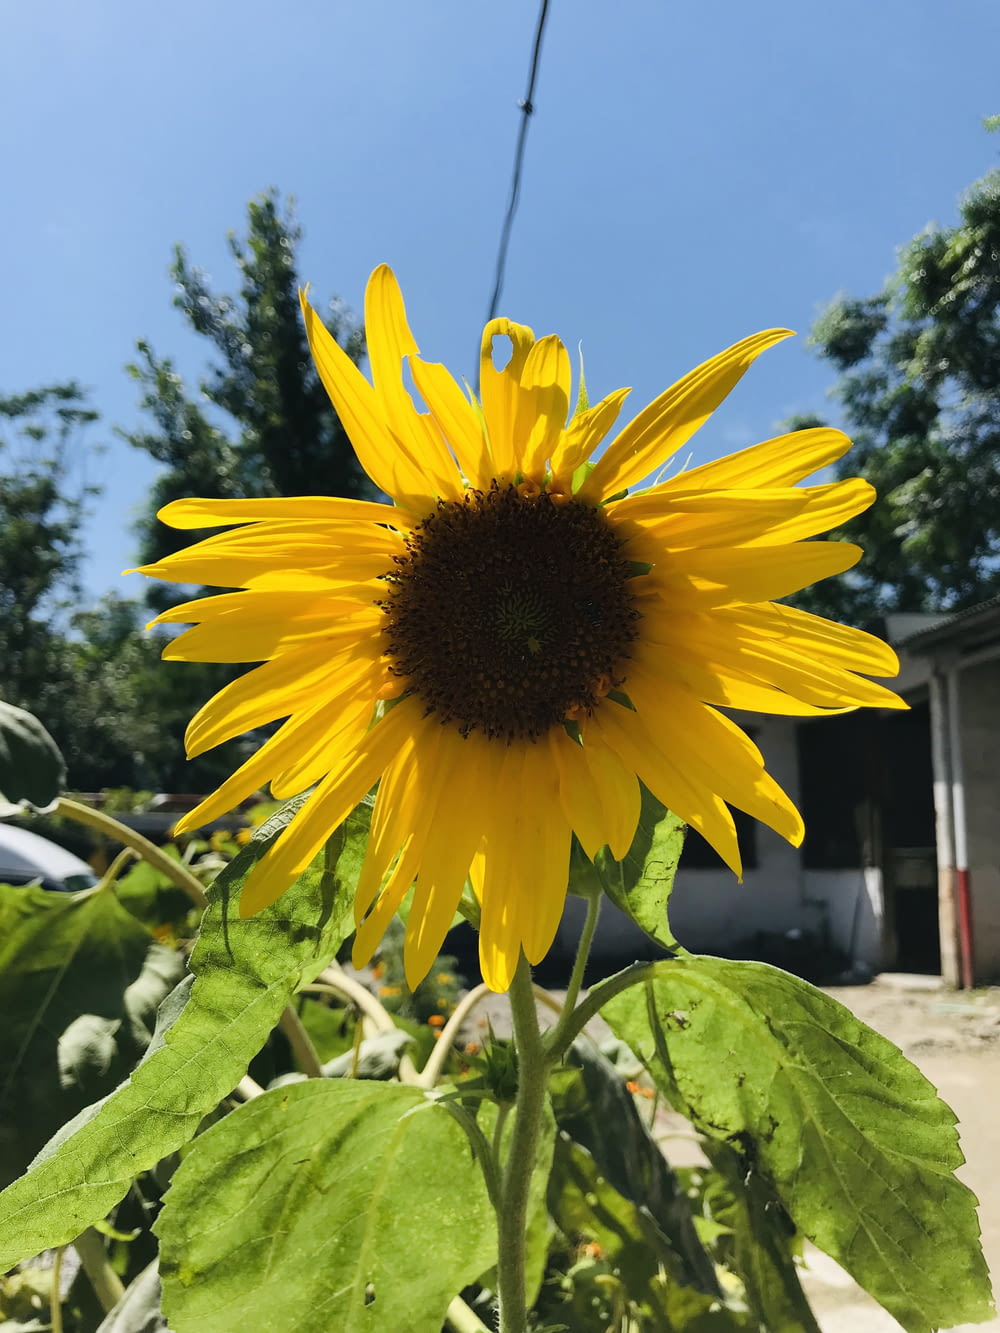 a large sunflower in a field with a house in the background